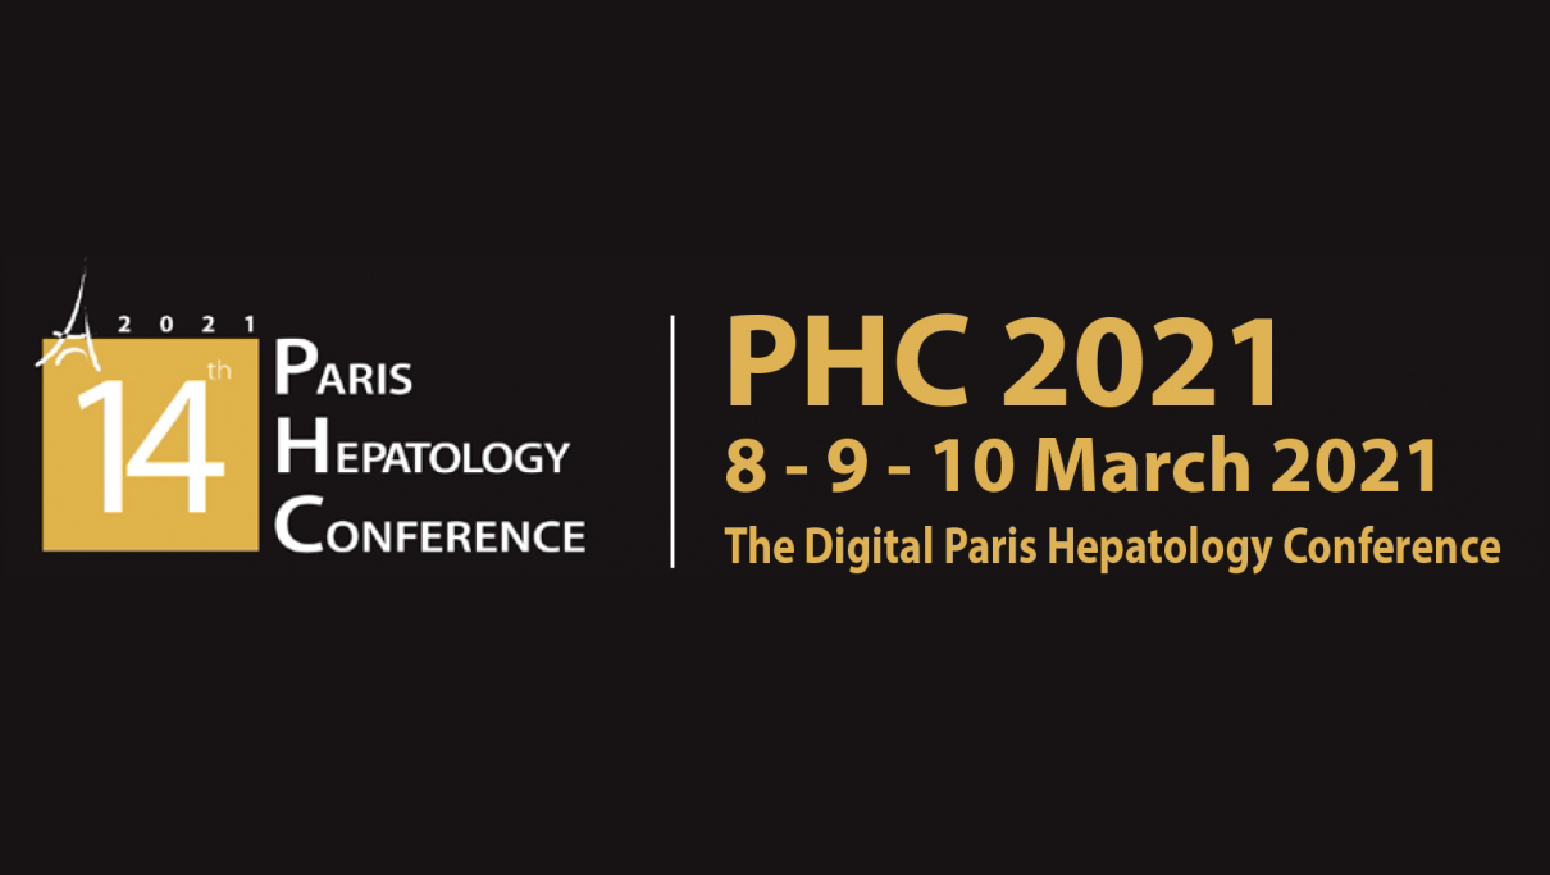 14th Paris Hepatology Conference event banner